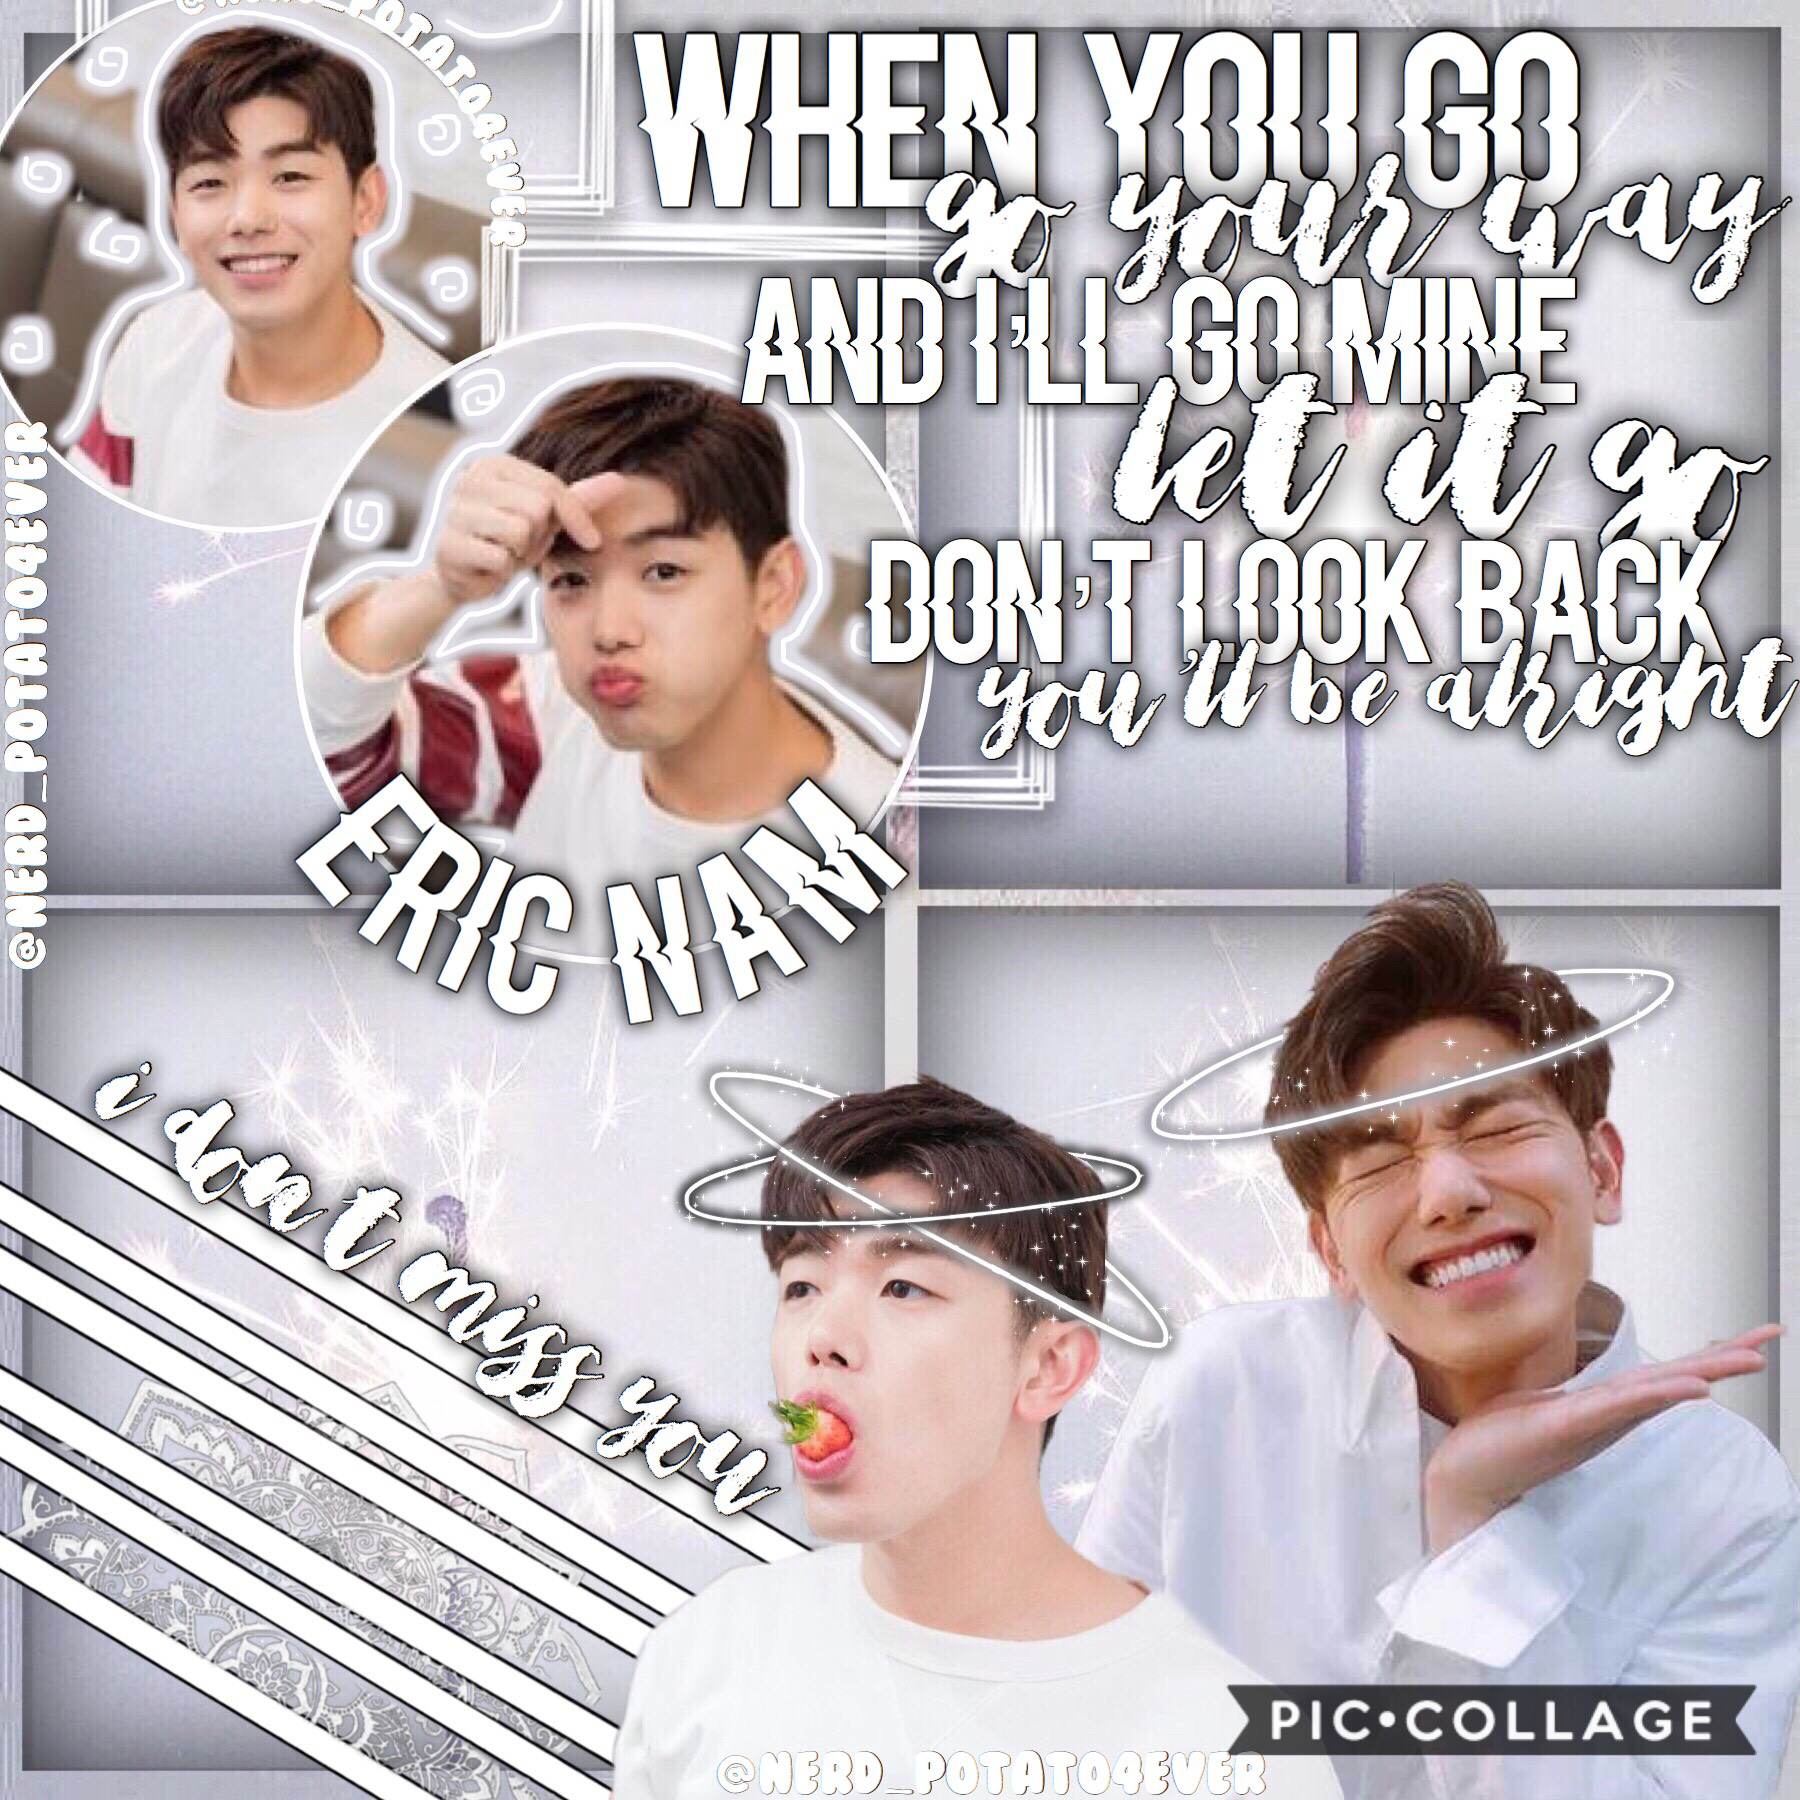 I love him?? so much?? (Tap)
so I made an Eric Nam (EEEE) Collage with the same style as jungkook’s birthday post, I think imma post some more like this 
I LOVE ERIC NAM SO MUCH IM GONNA CRY
